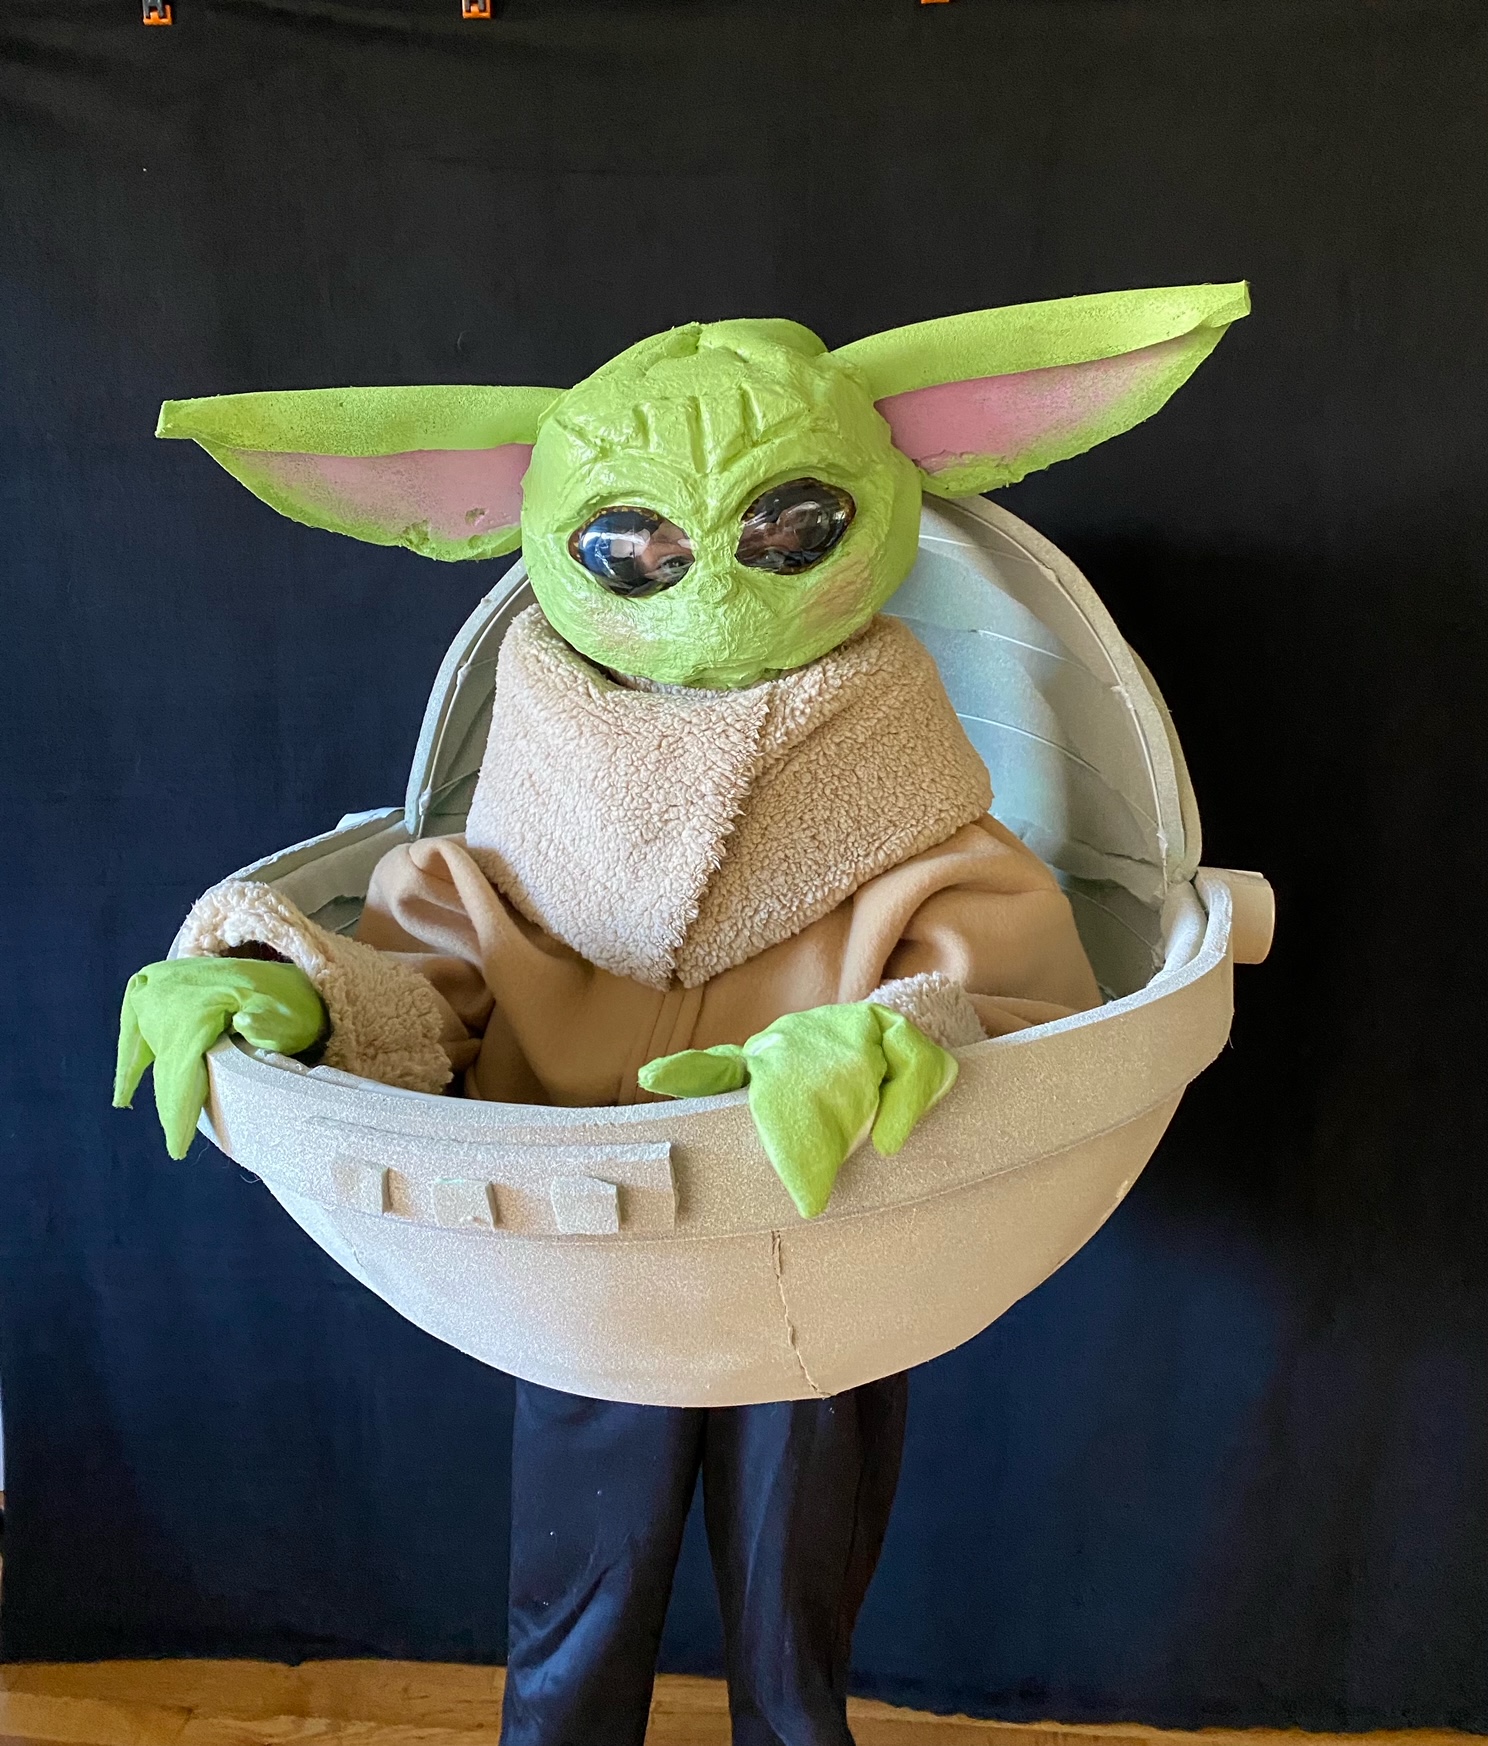 Coolest DIY Baby Yoda Costume from The Mandalorian